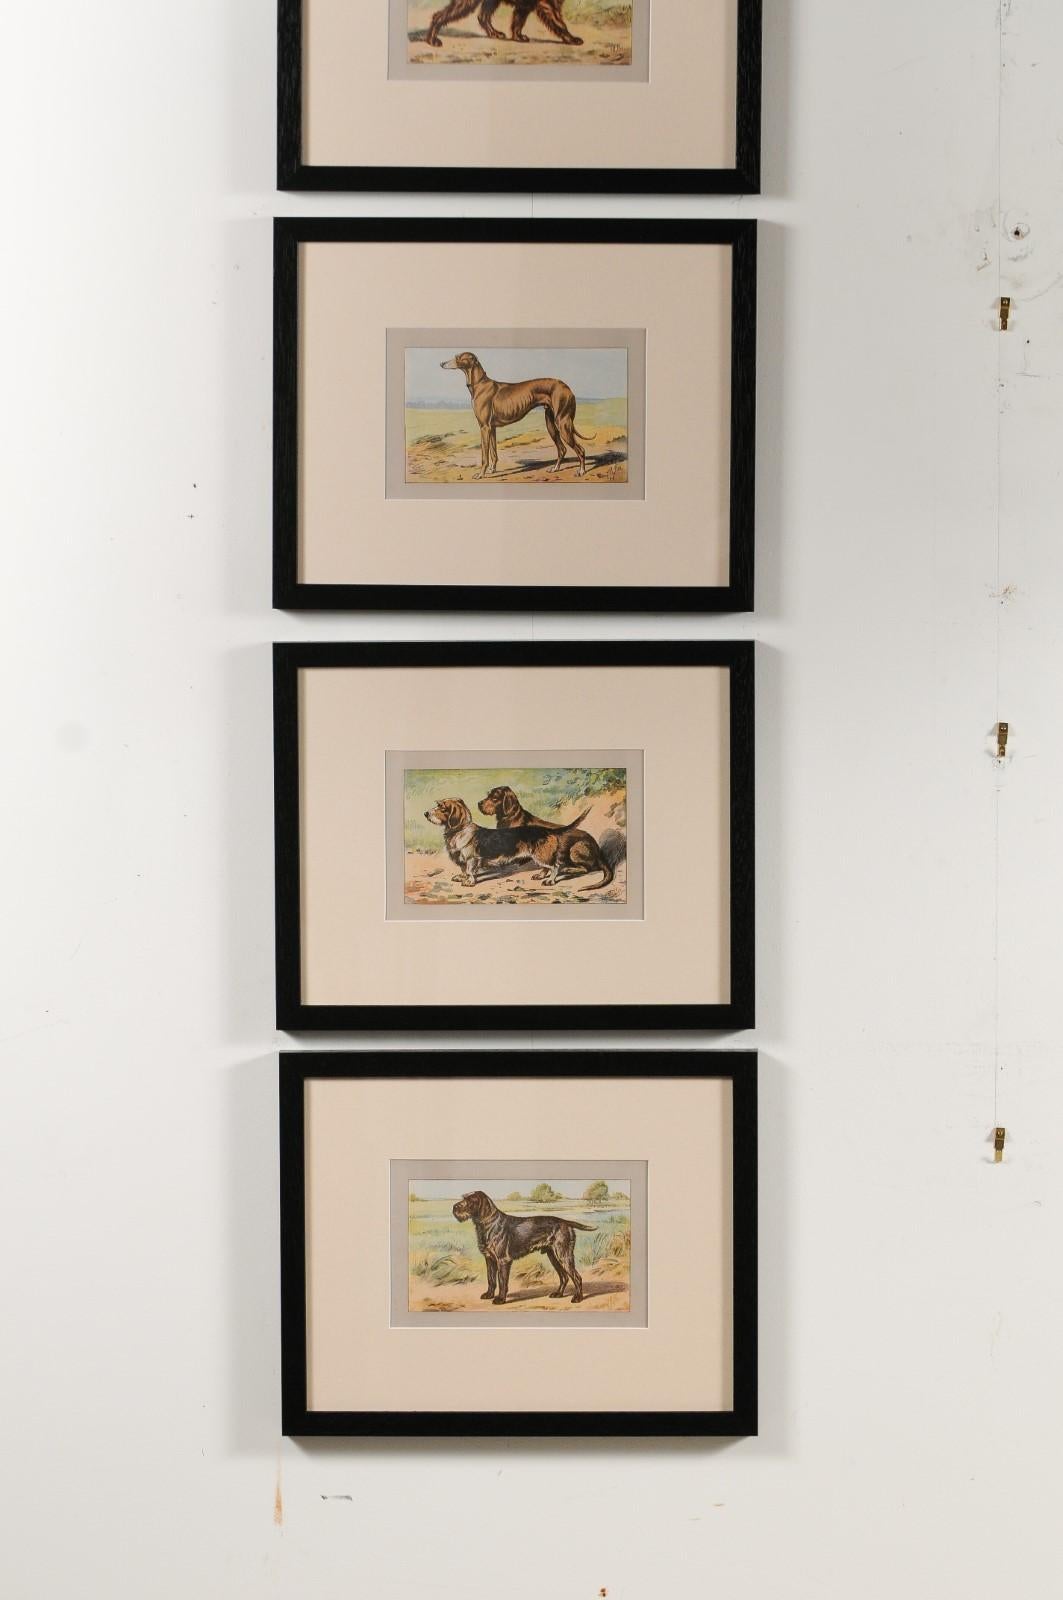 Glass P. Mahler Custom Framed Lithographs Depicting Hunting Dogs in Outdoor Scenes